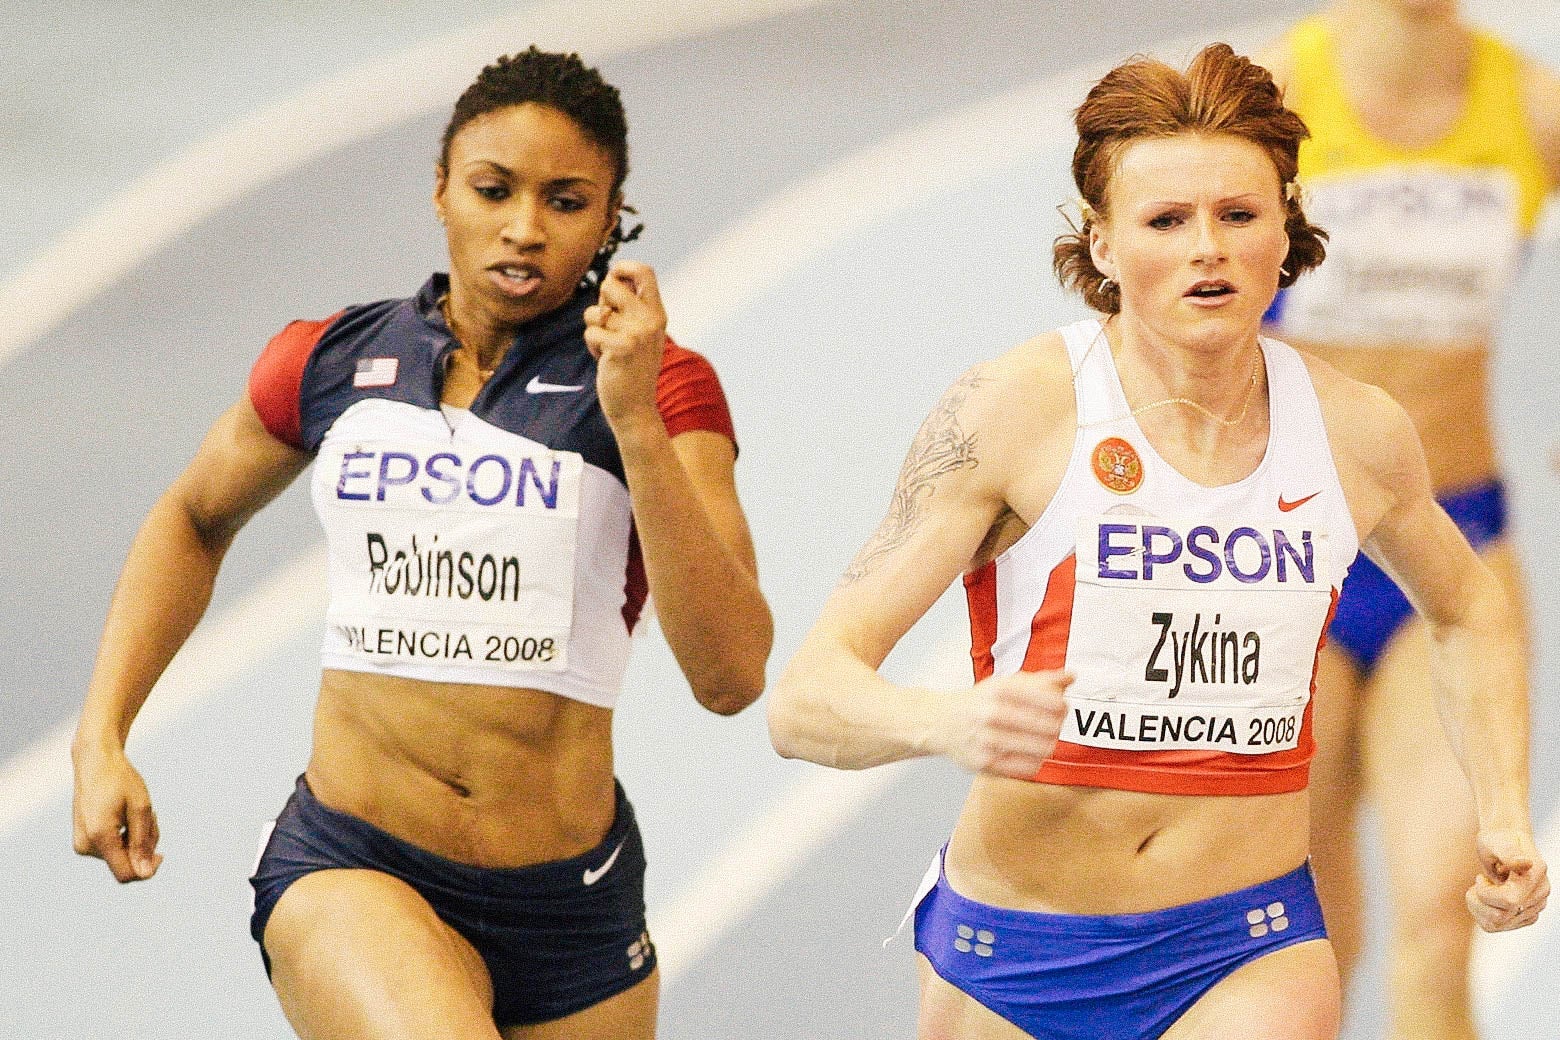 Zykina and Robinson sprinting neck and neck